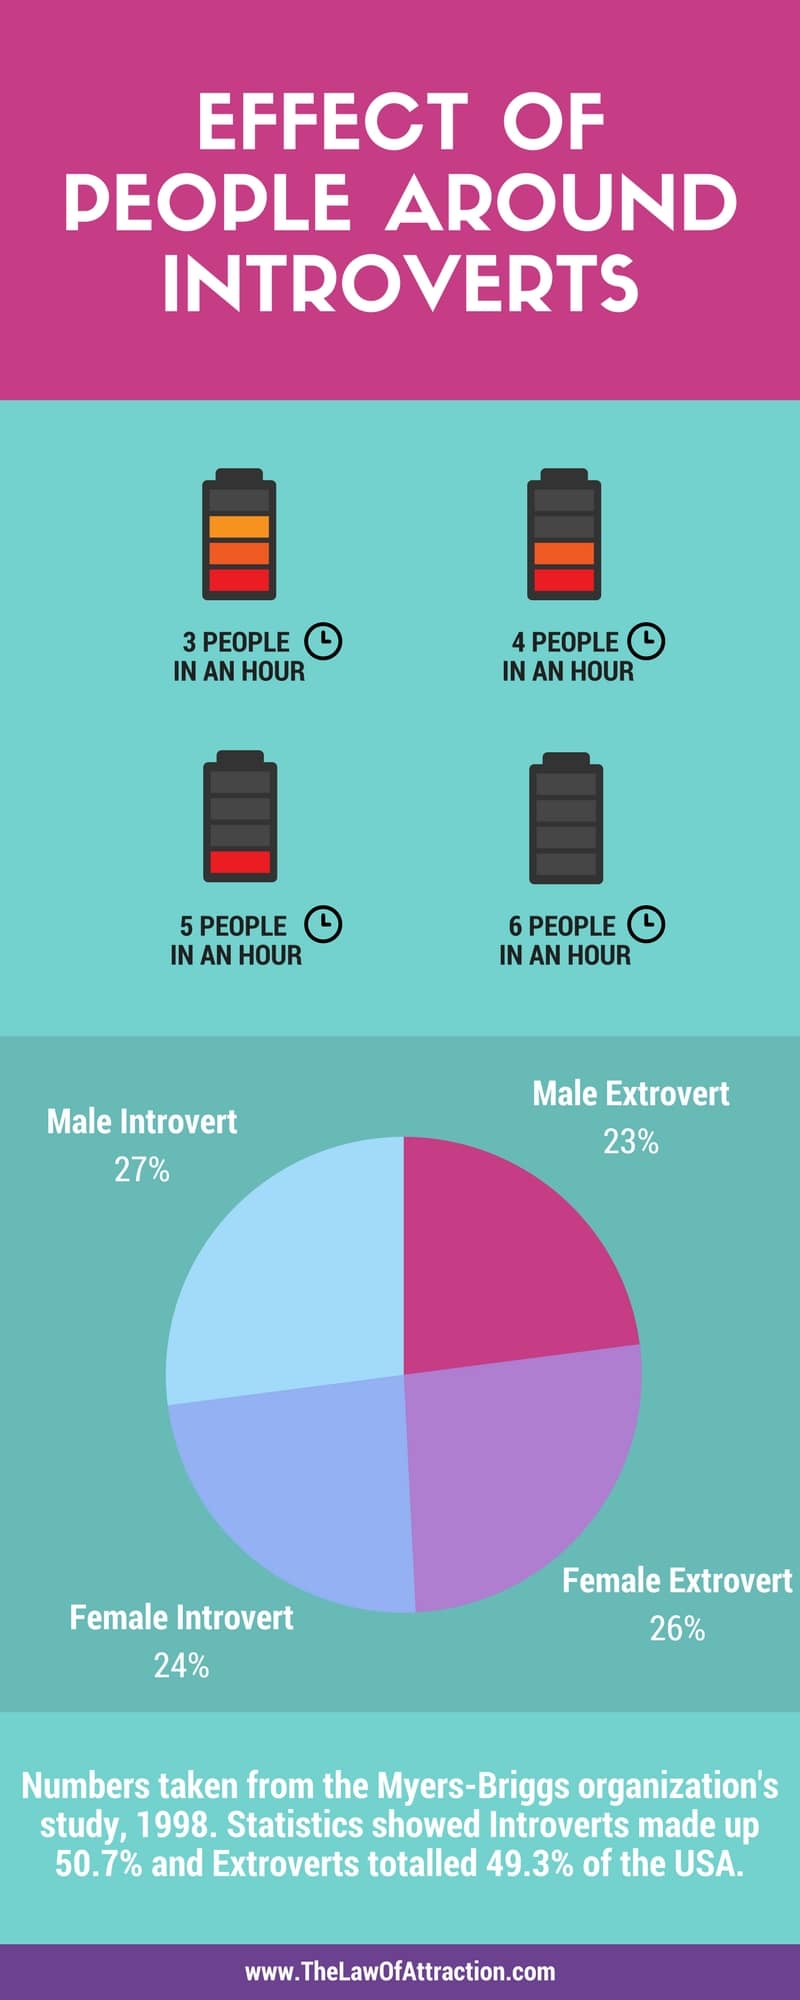 EFFECT OF PEOPLE AROUND INTROVERTS